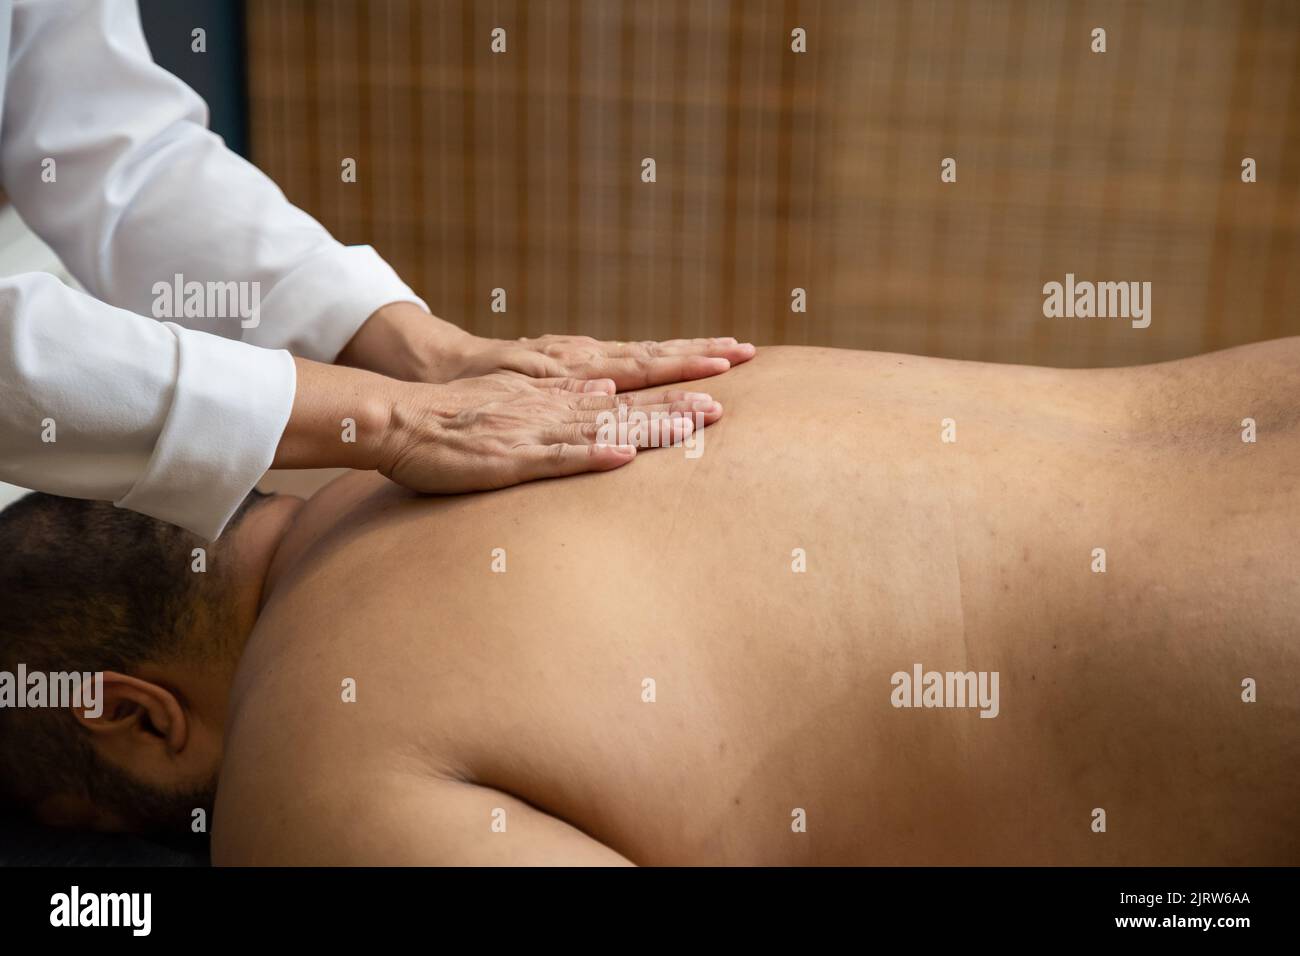 Goiânia, Goias, Brazil – July 18, 2022: A professional doing therapeutic massage on the back of the patient who is lying on the stretcher. Stock Photo